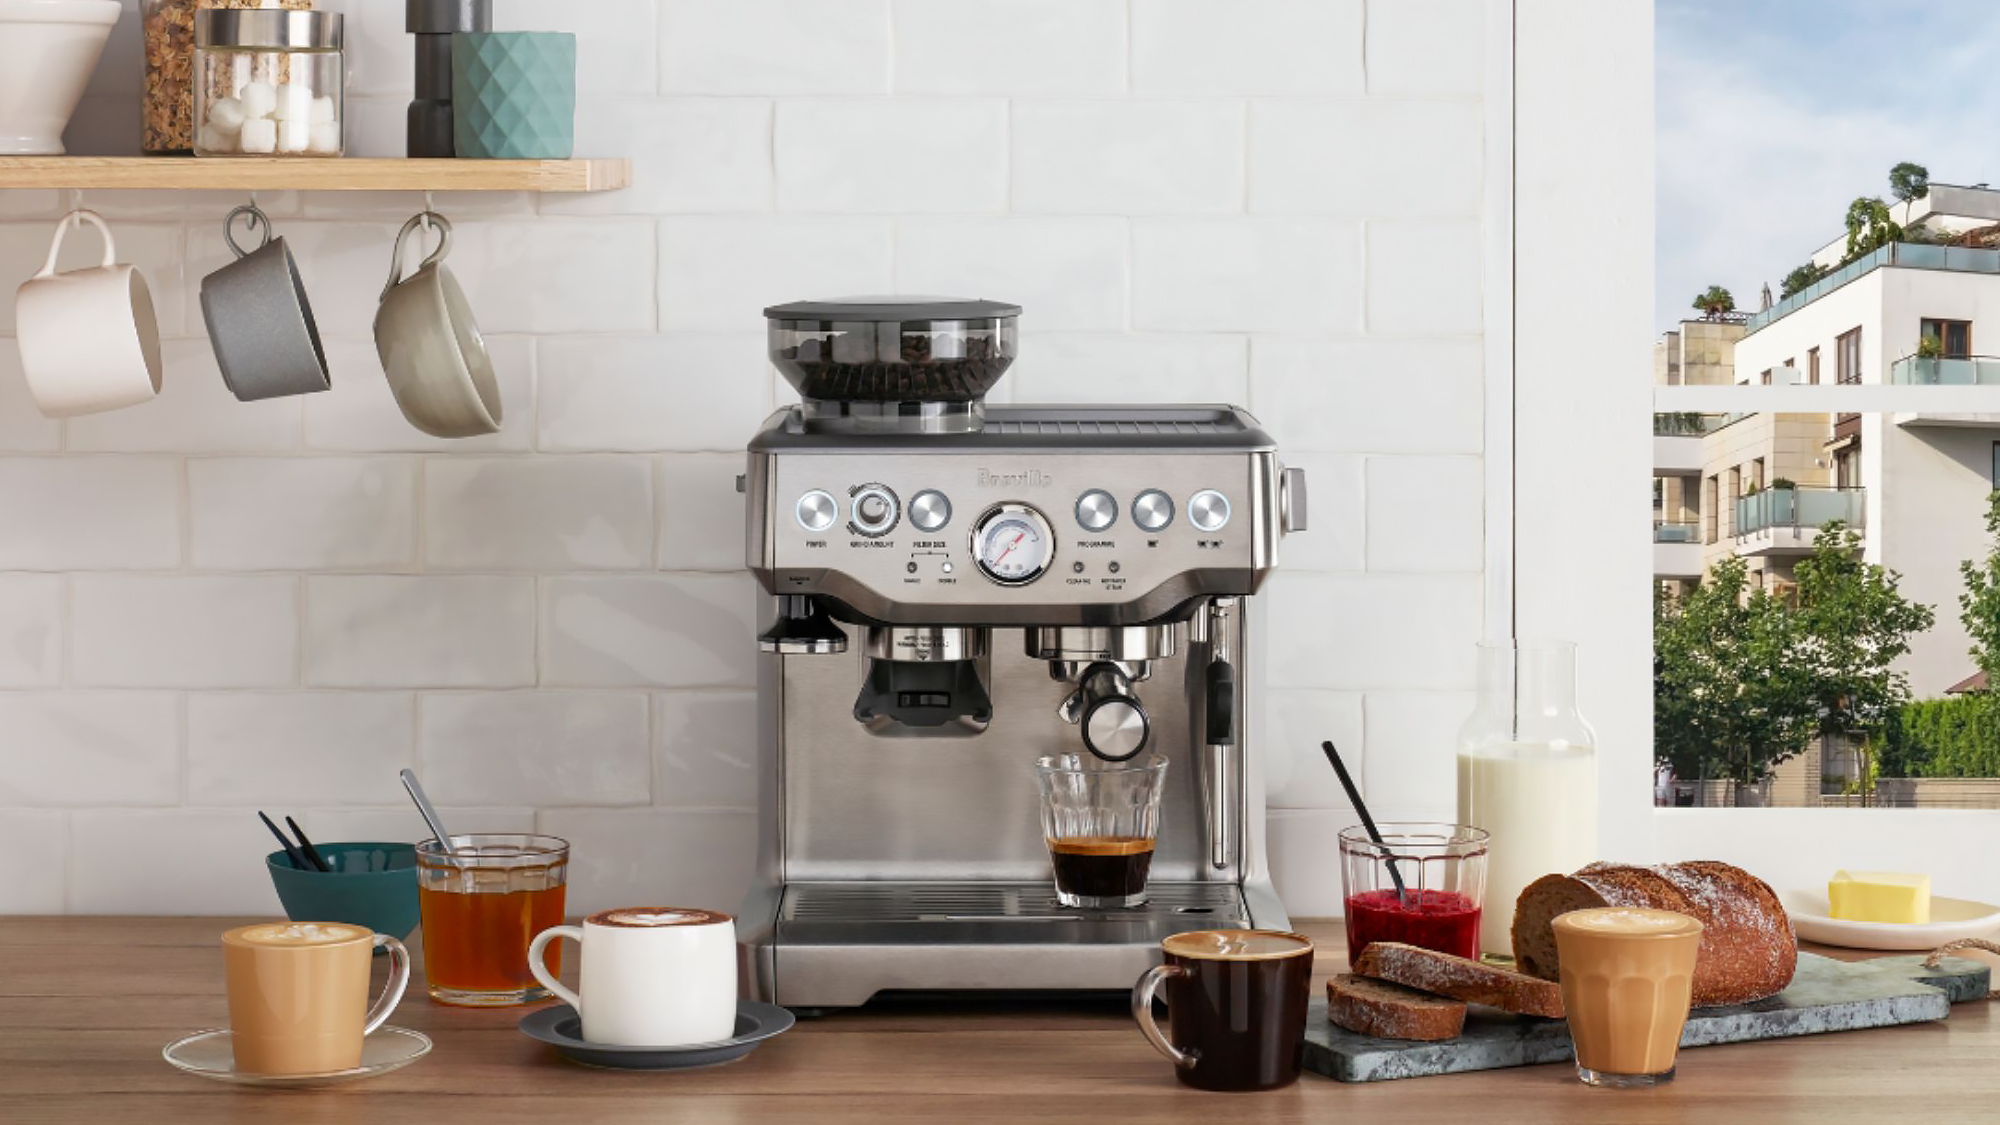 The 9 Best Espresso Machines of 2024, Tested & Reviewed